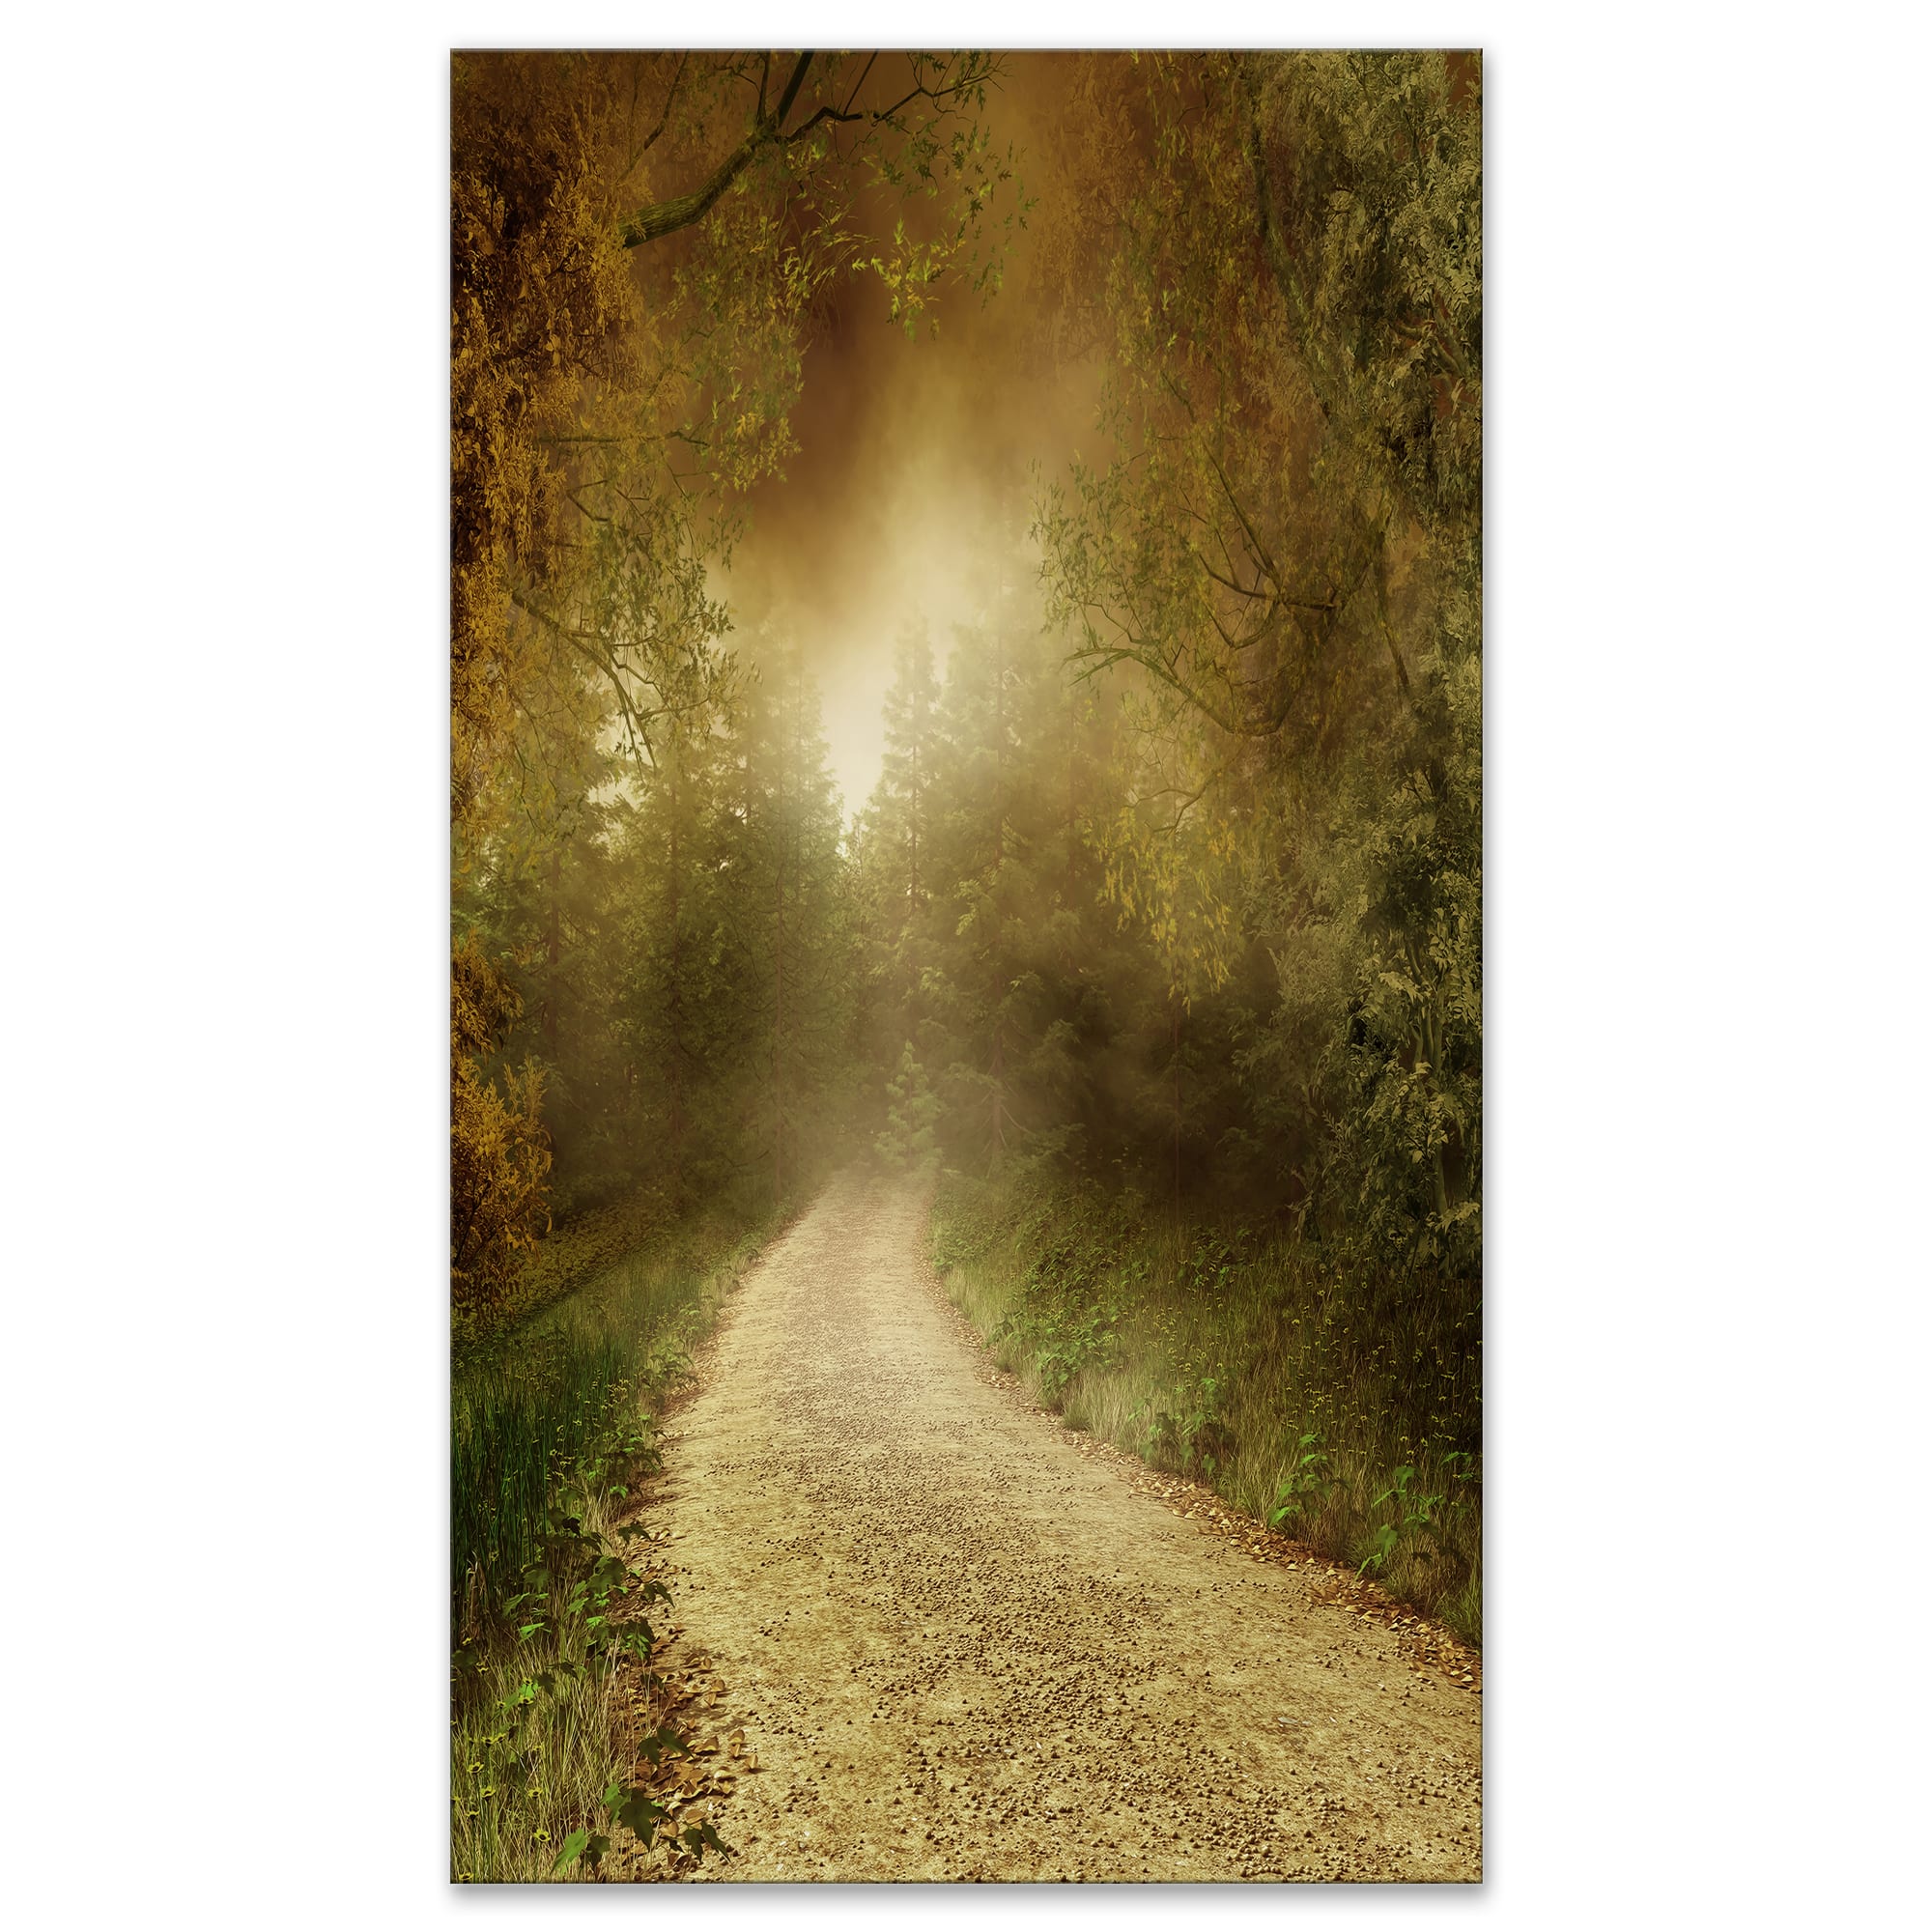 Designart - Country Road Through Fall Scenery - Landscape Photography Canvas Print